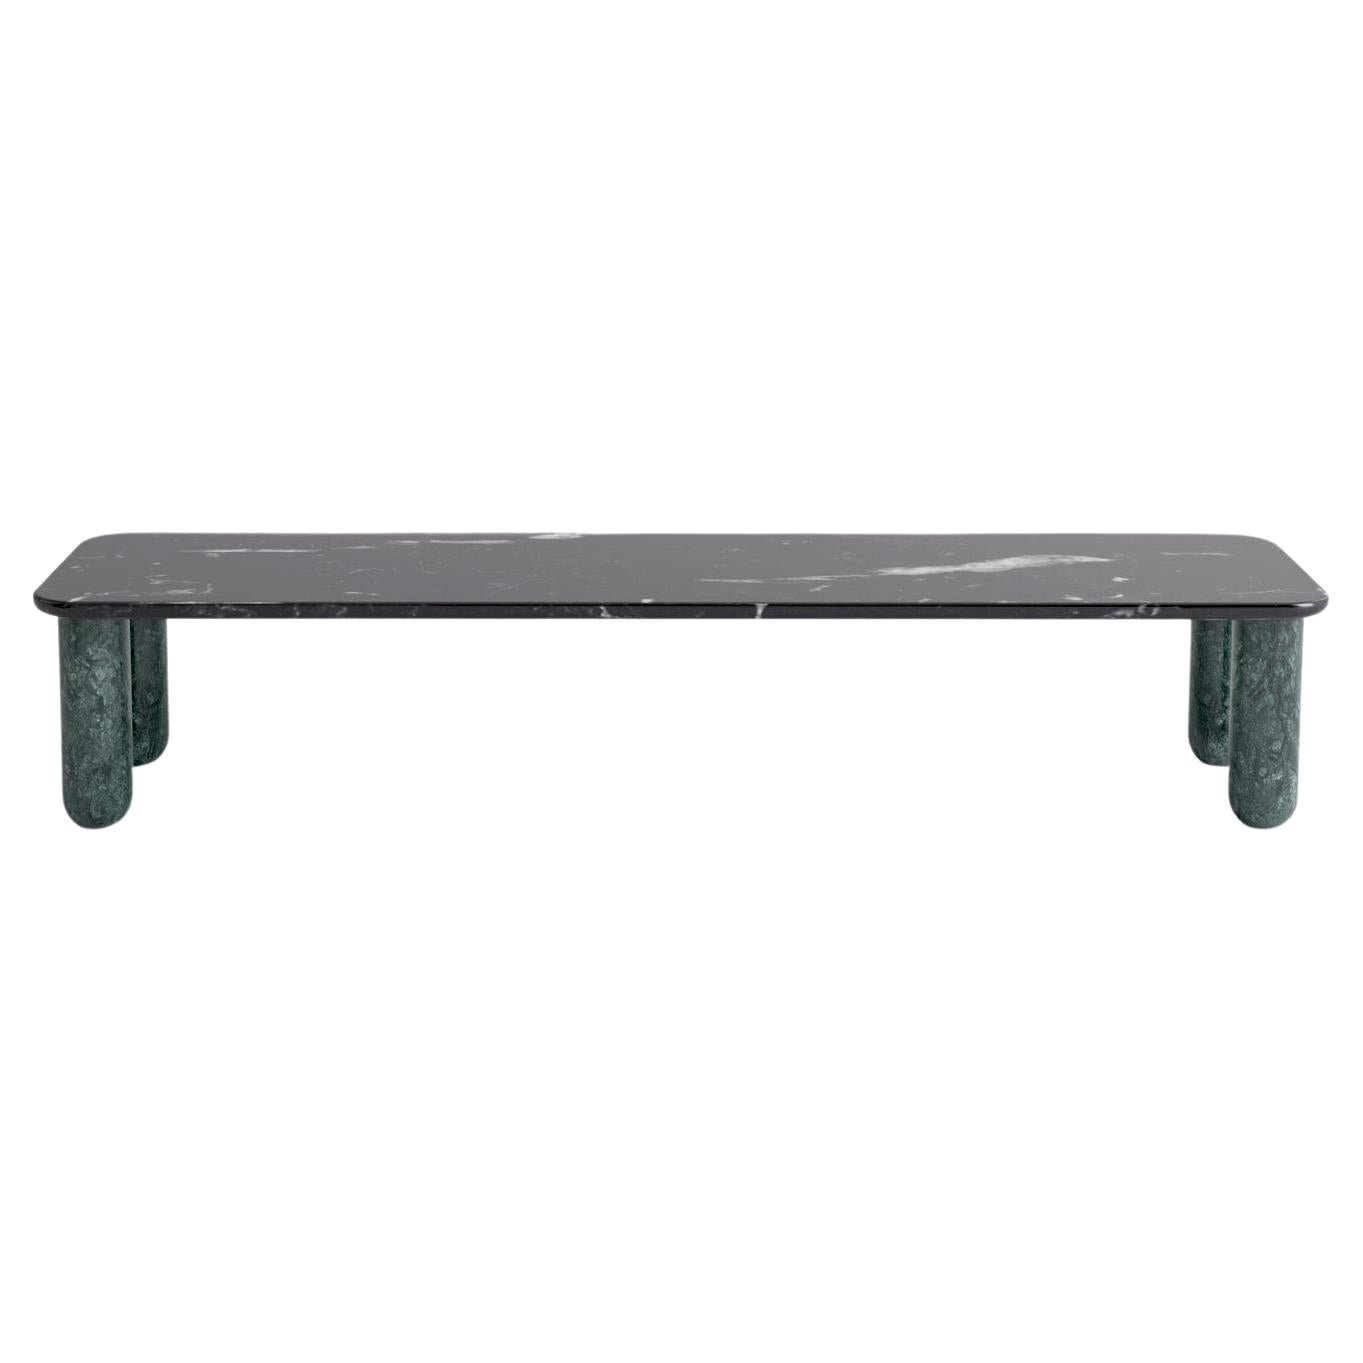 Large Black and Green Marble "Sunday" Coffee Table, Jean-Baptiste Souletie For Sale